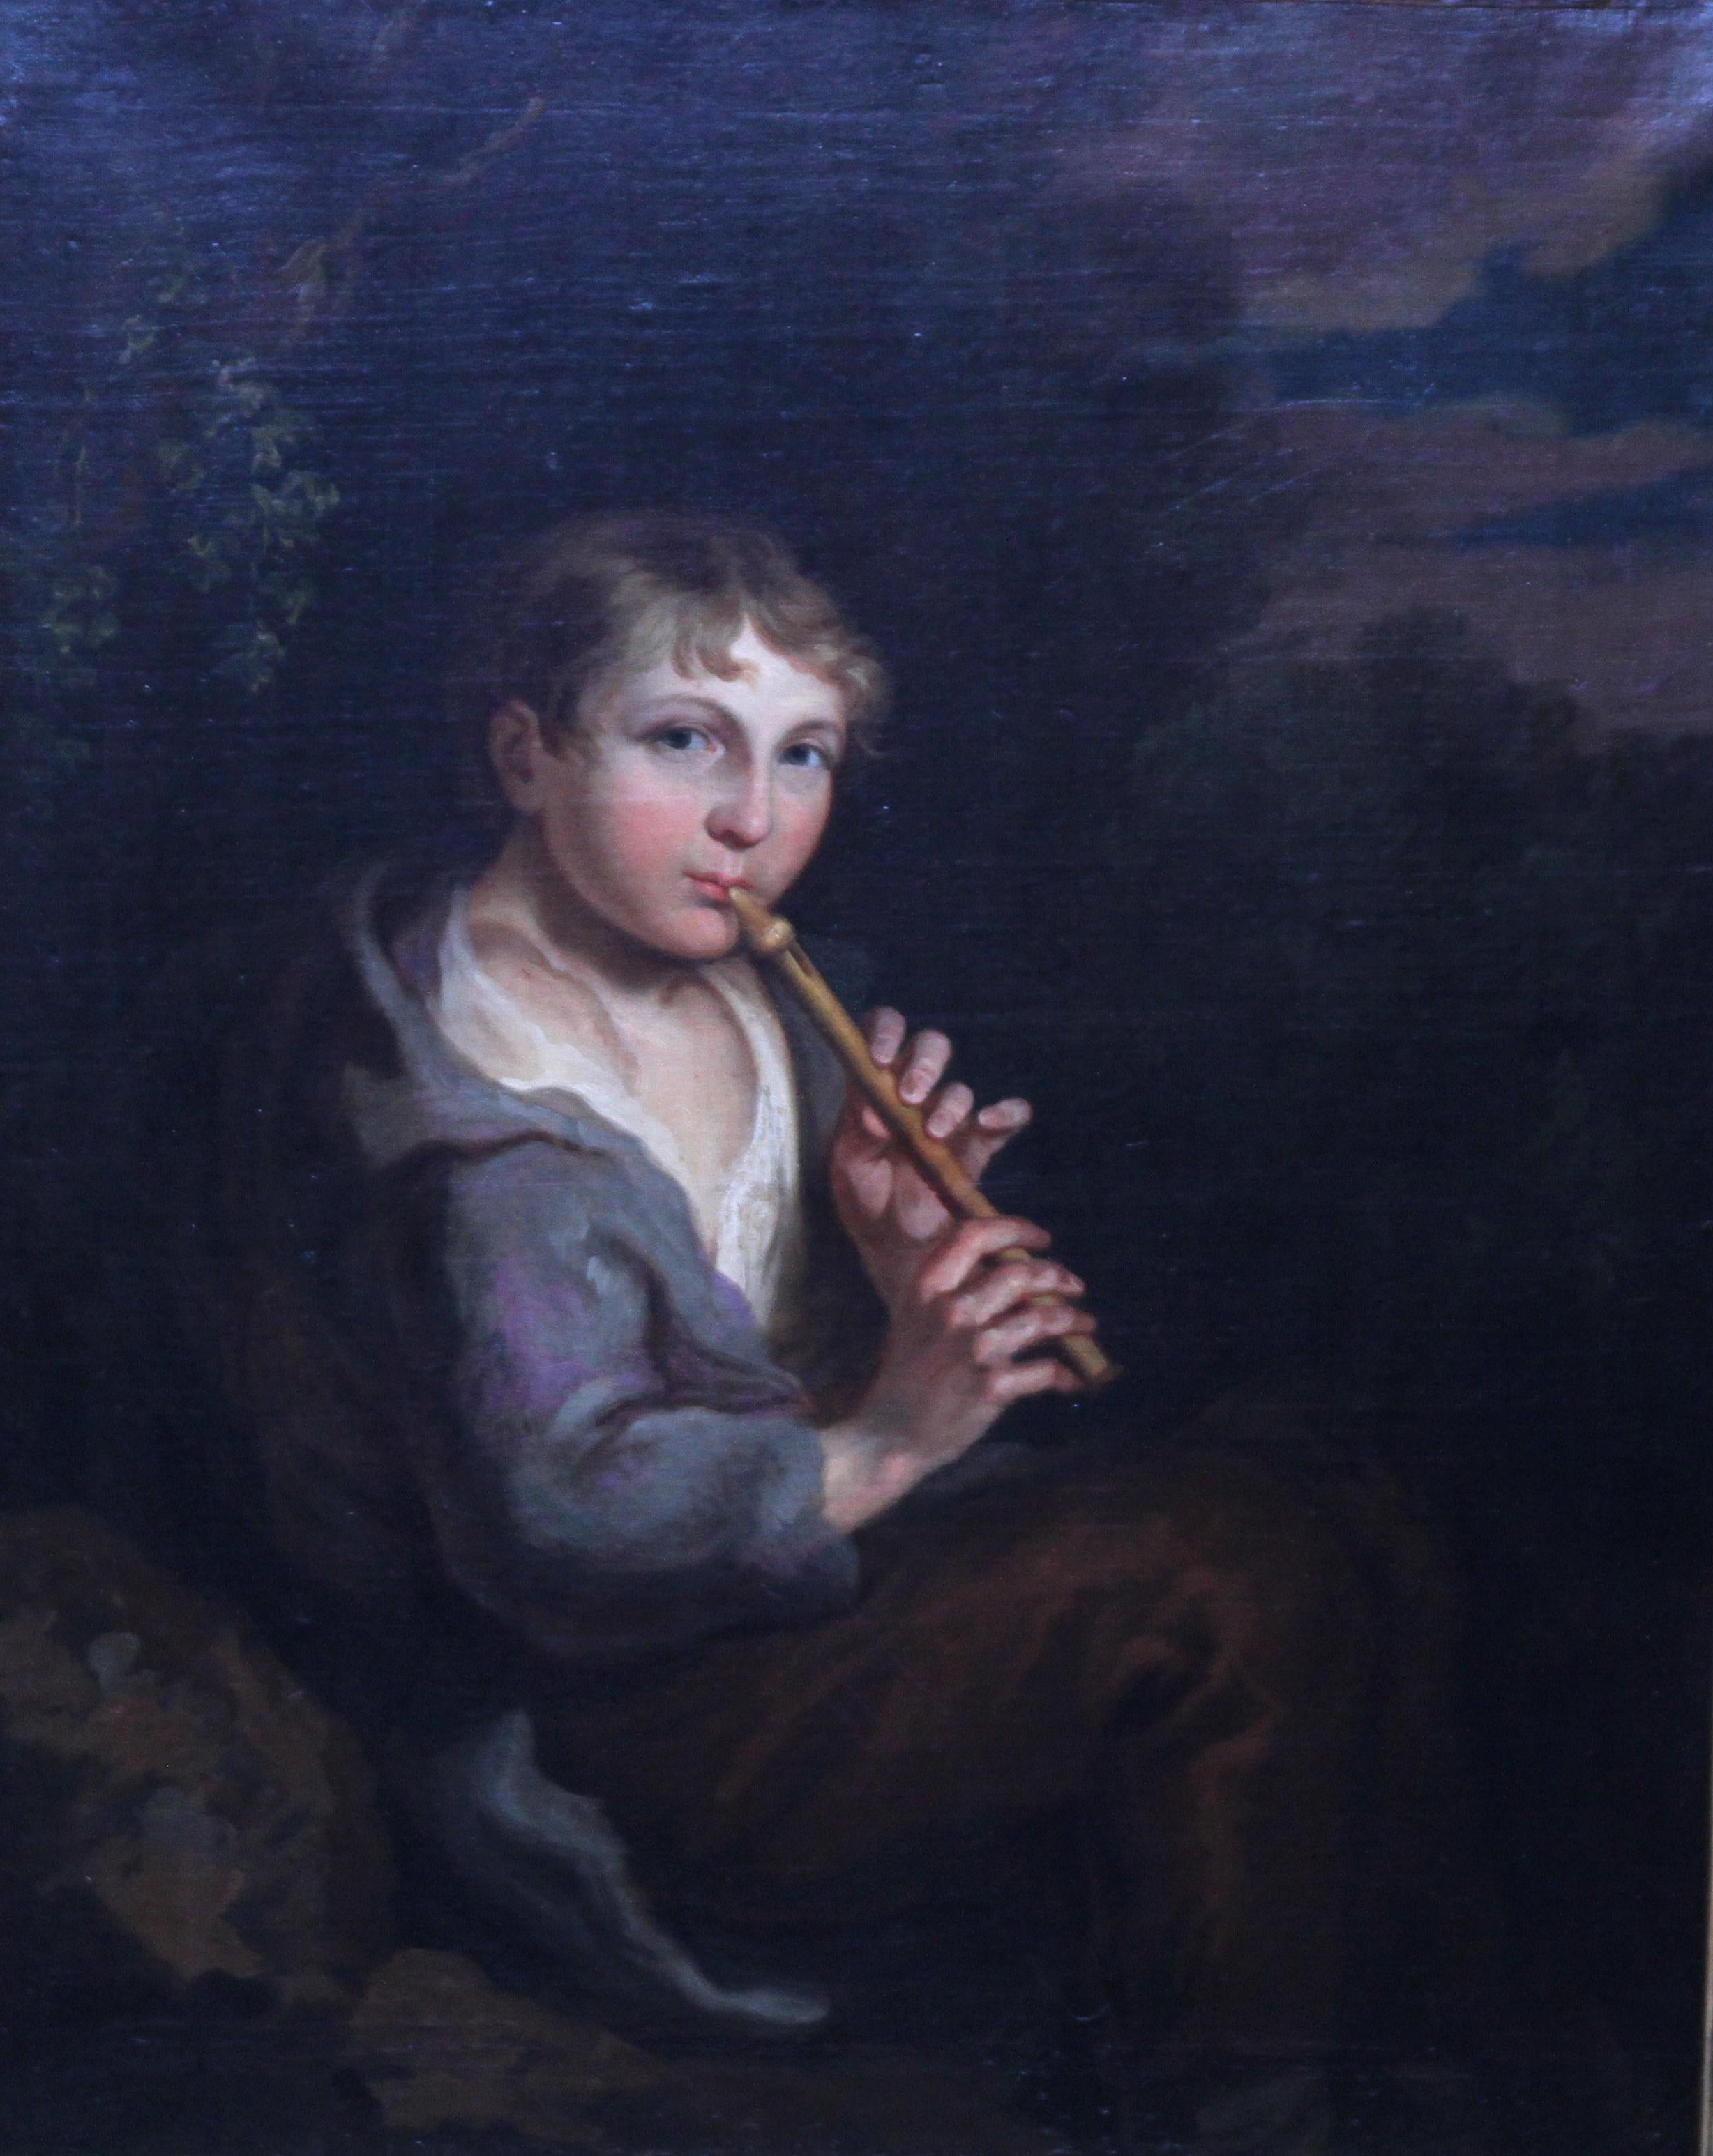 Portrait of Boy Playing a Flute - 18th/19th century art Old Master oil painting  - Painting by Thomas Barker of Bath (att.) 